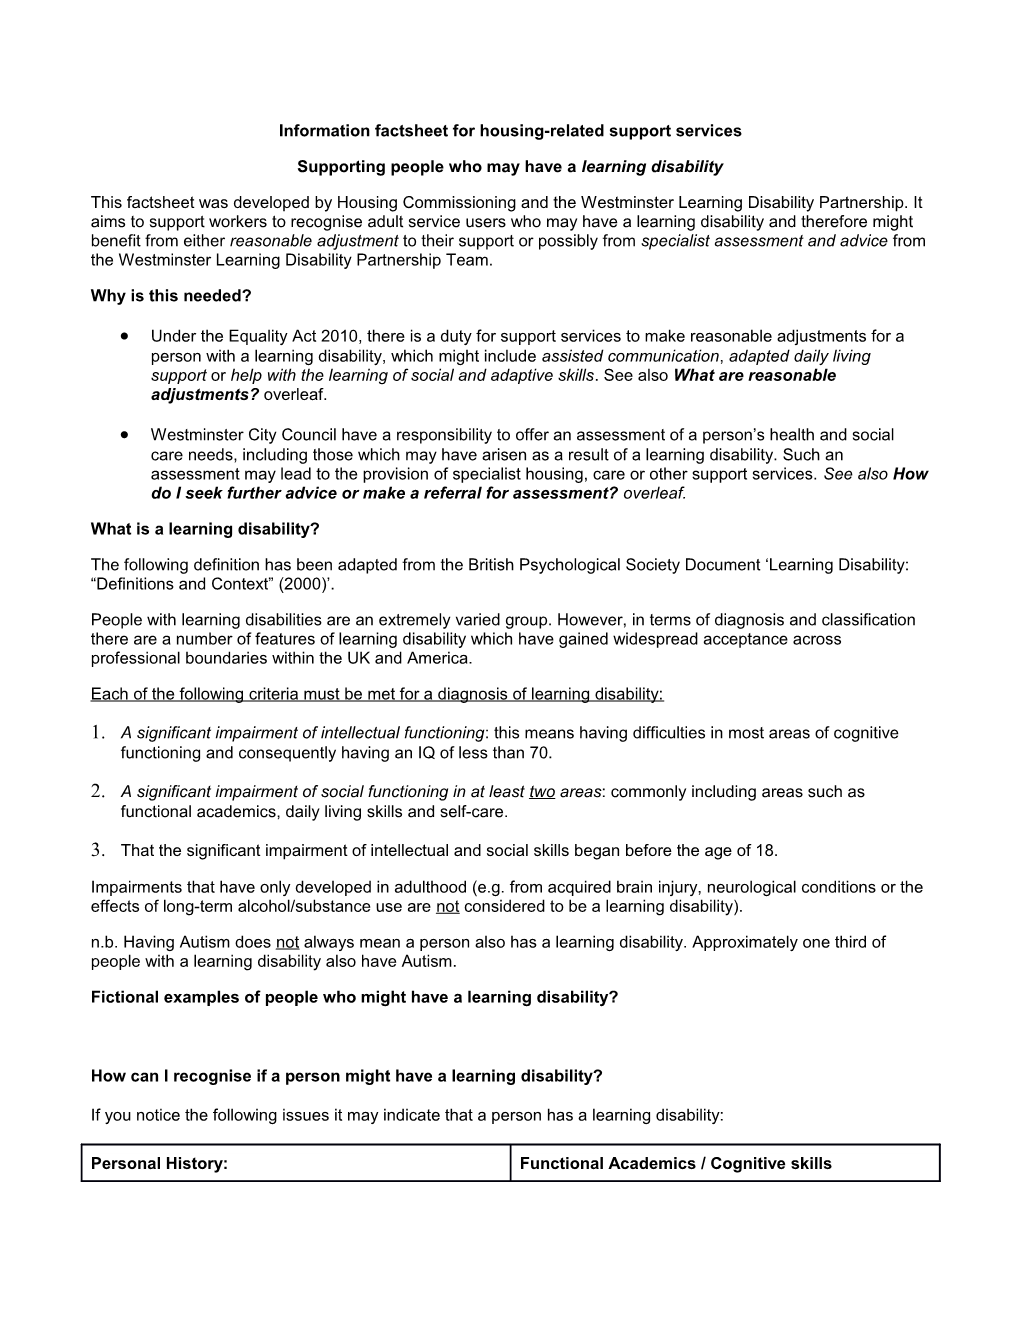 Information Factsheet for Housing-Related Support Services